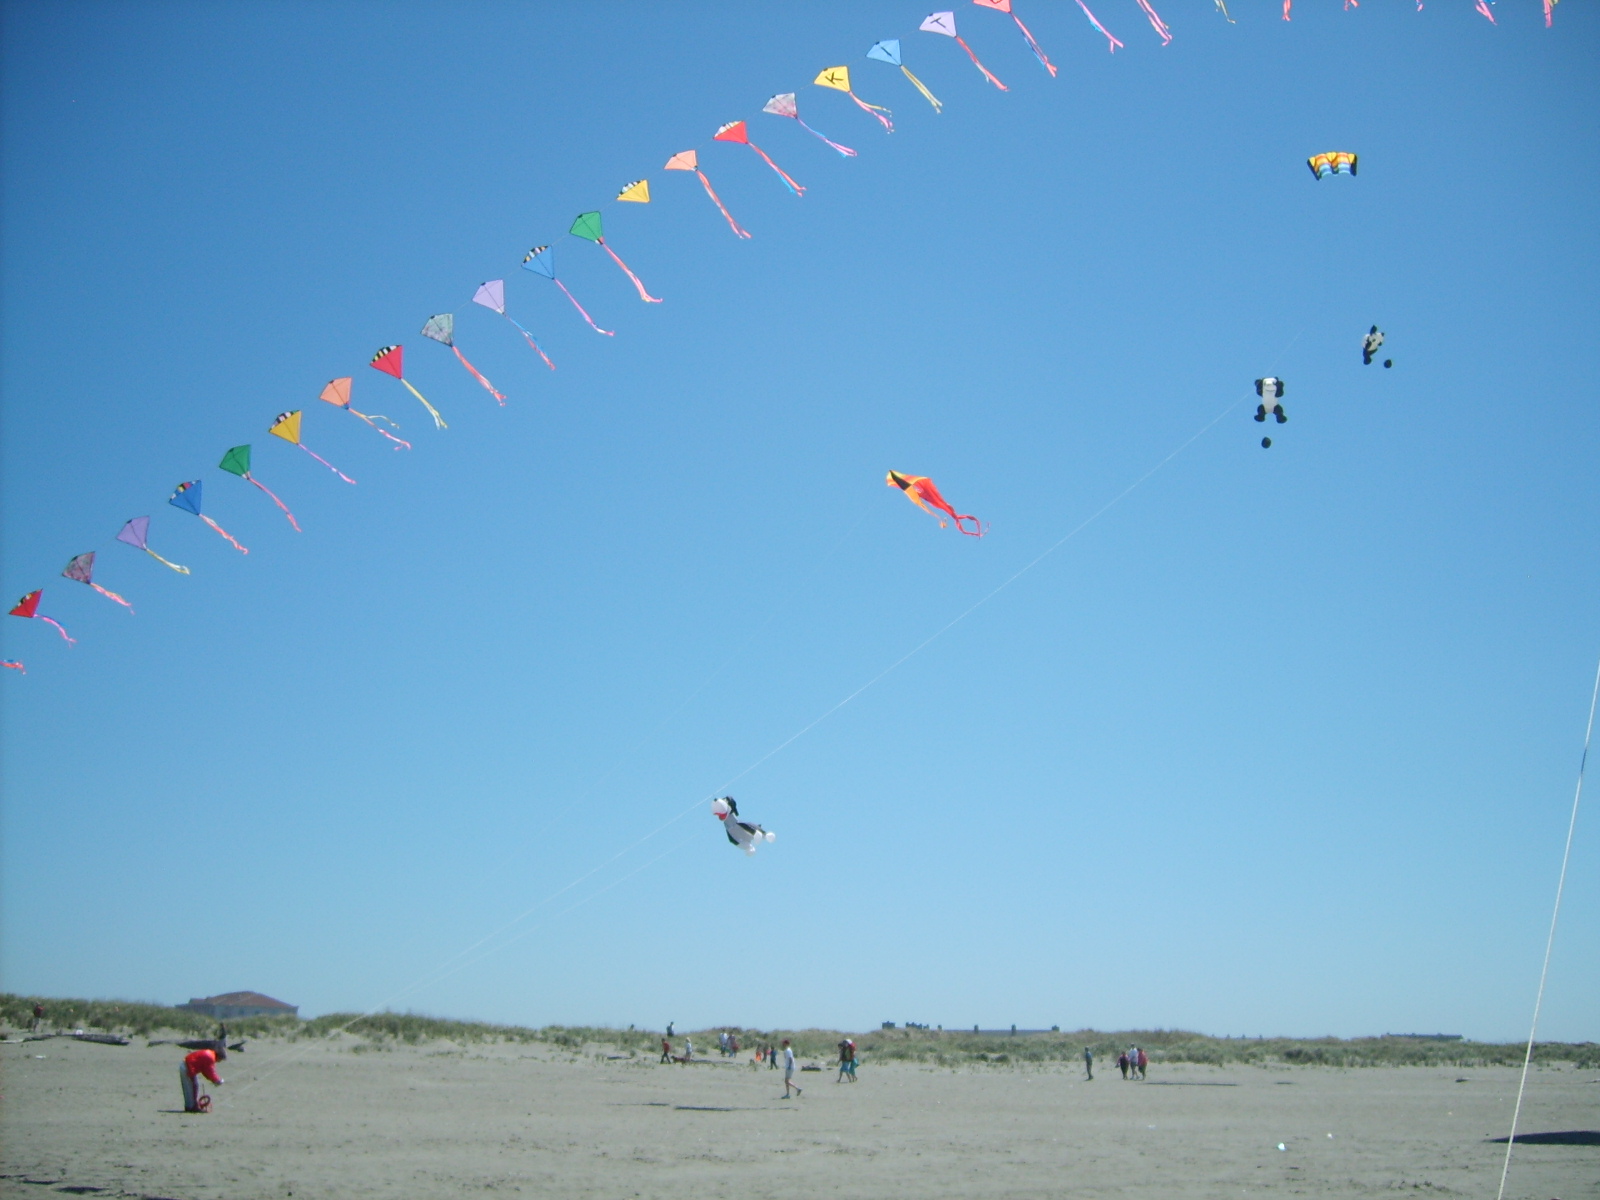 people in the sand flying colorful kites on a sunny day